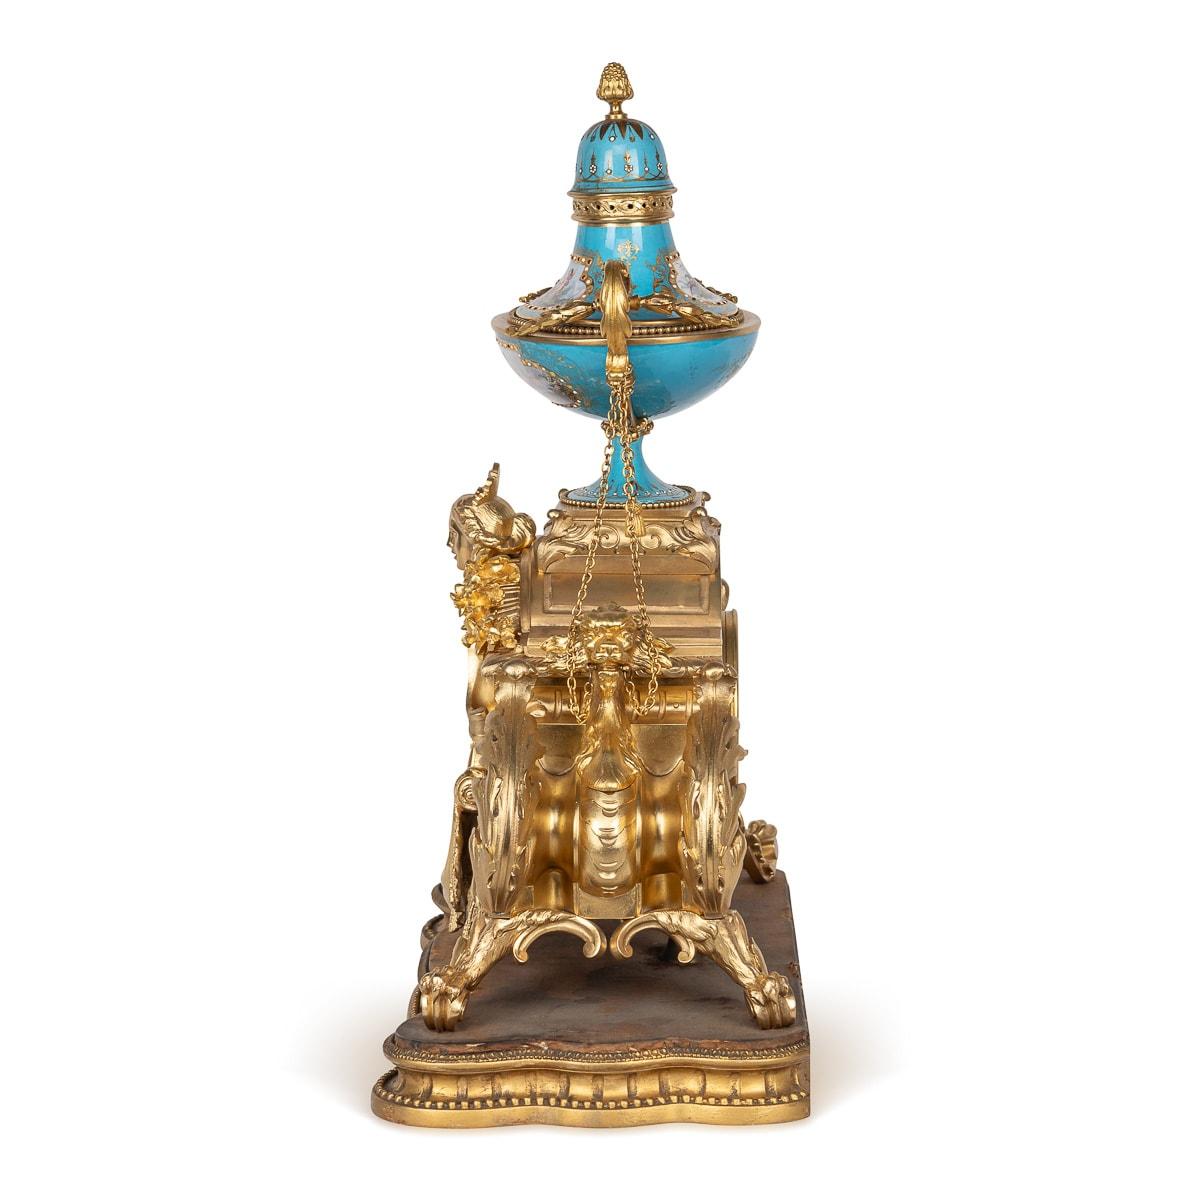 Antique 19th Century French Louis XV style mantel clock, a captivating piece fashioned from Sevres style porcelain and adorned with ormolu accents. Atop the clock rests a striking 'bleu celeste' painted porcelain urn, complemented by a fruit cone